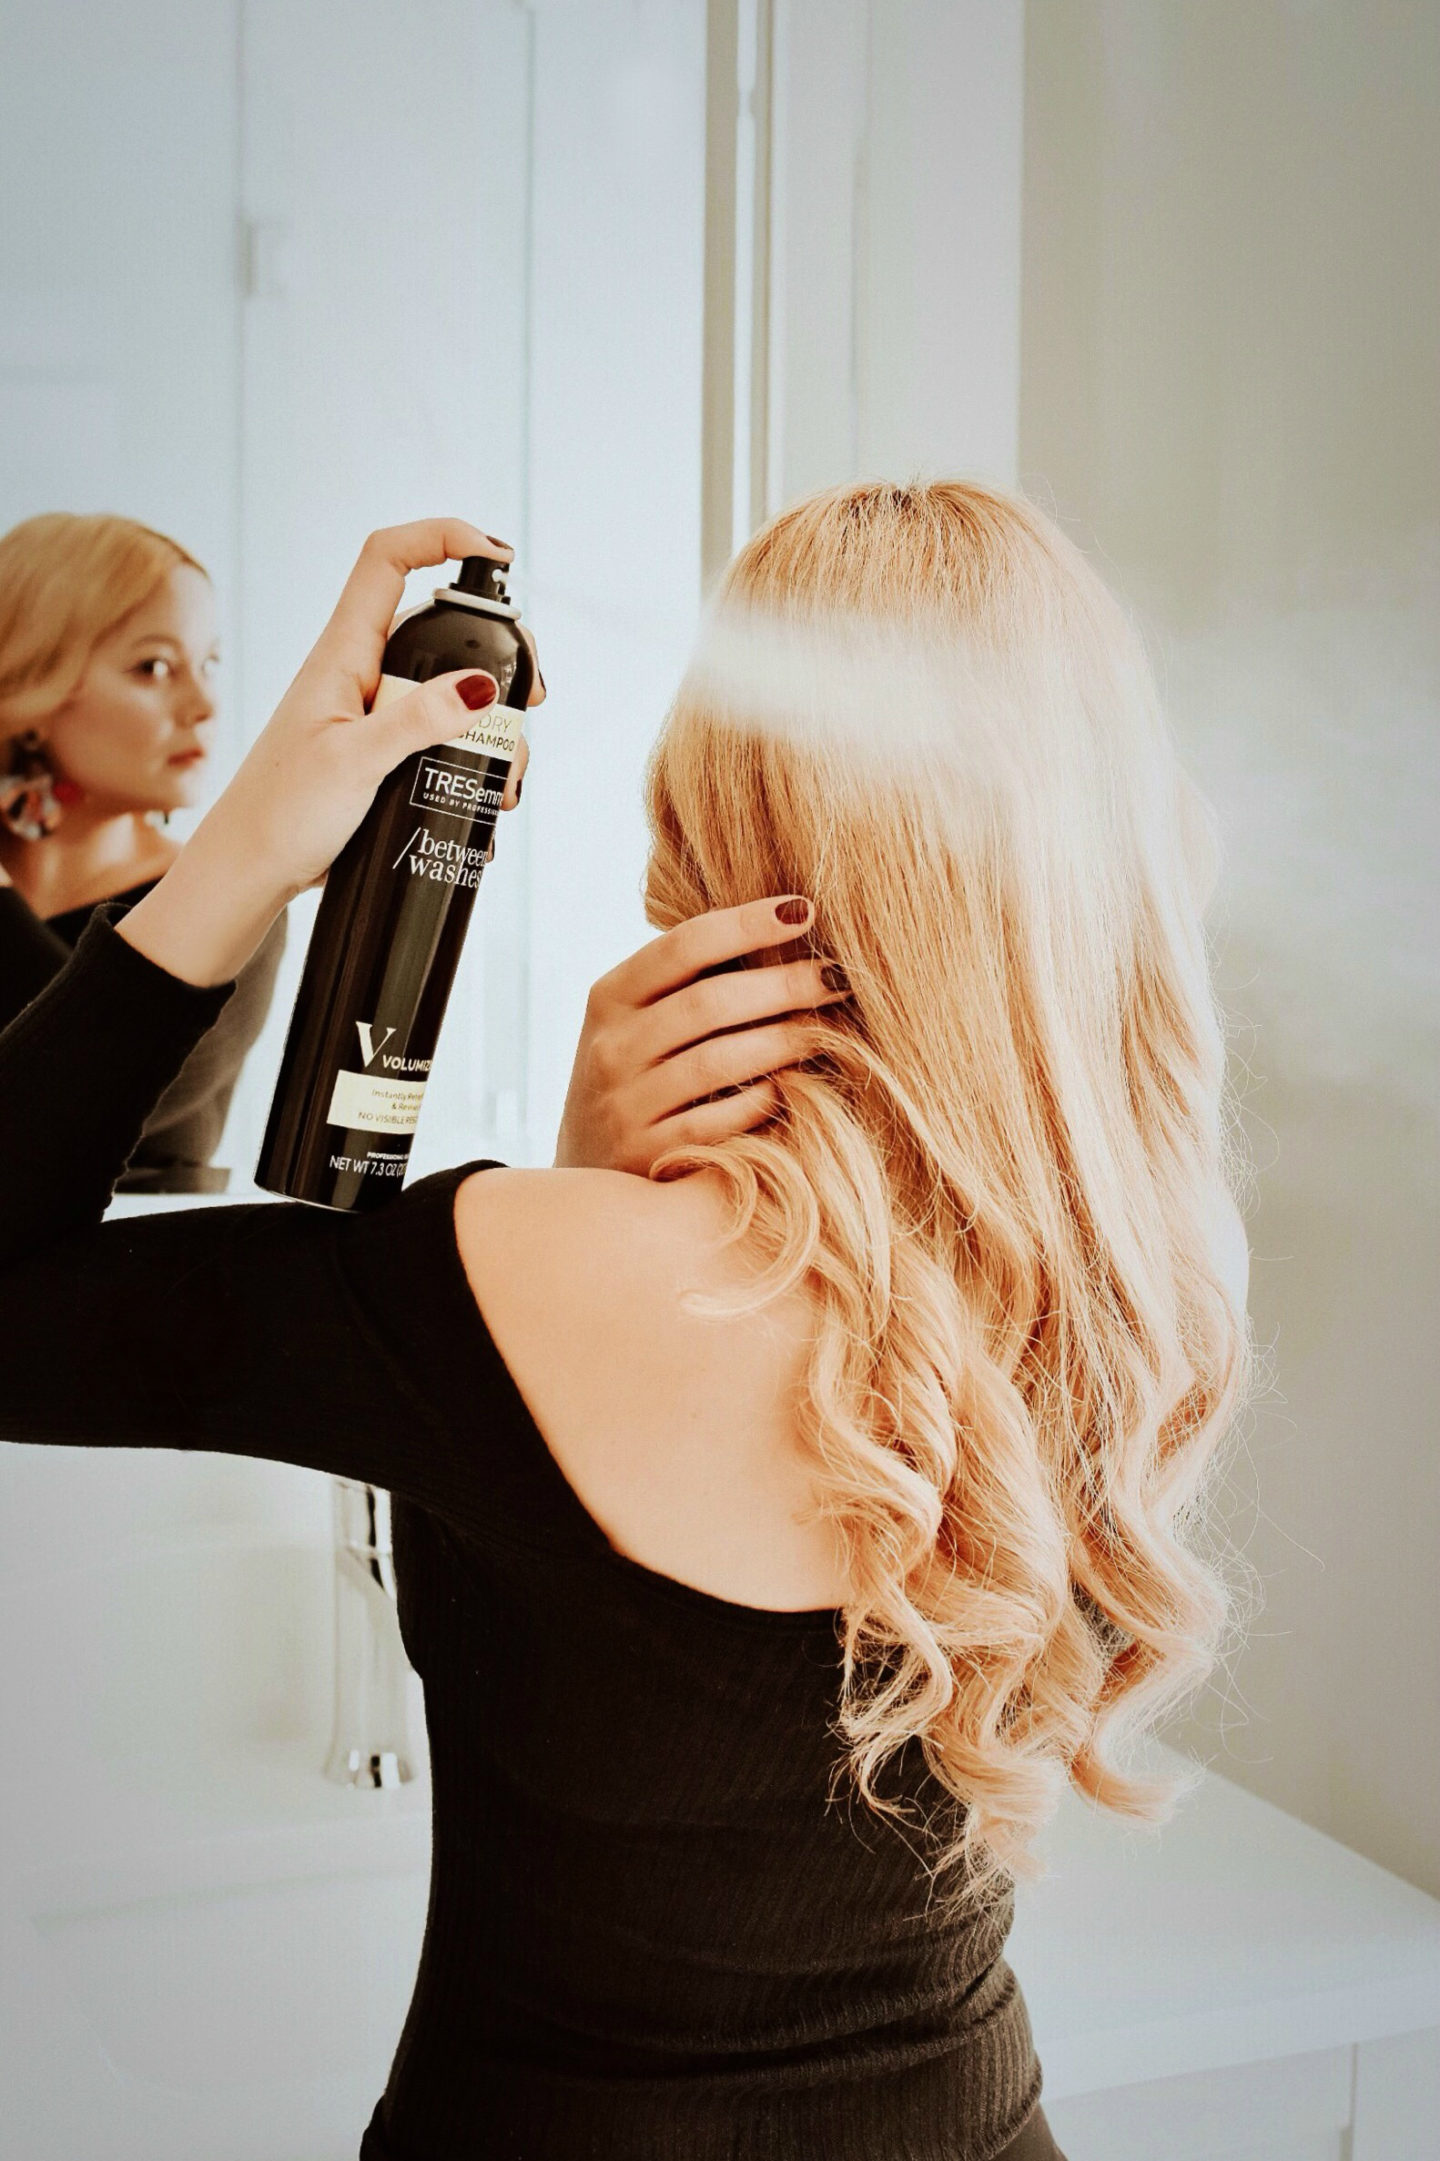 Tresemme-2nd-day-hairstyle-dry-shampoo-vanessa-lambert-whatwouldvwear